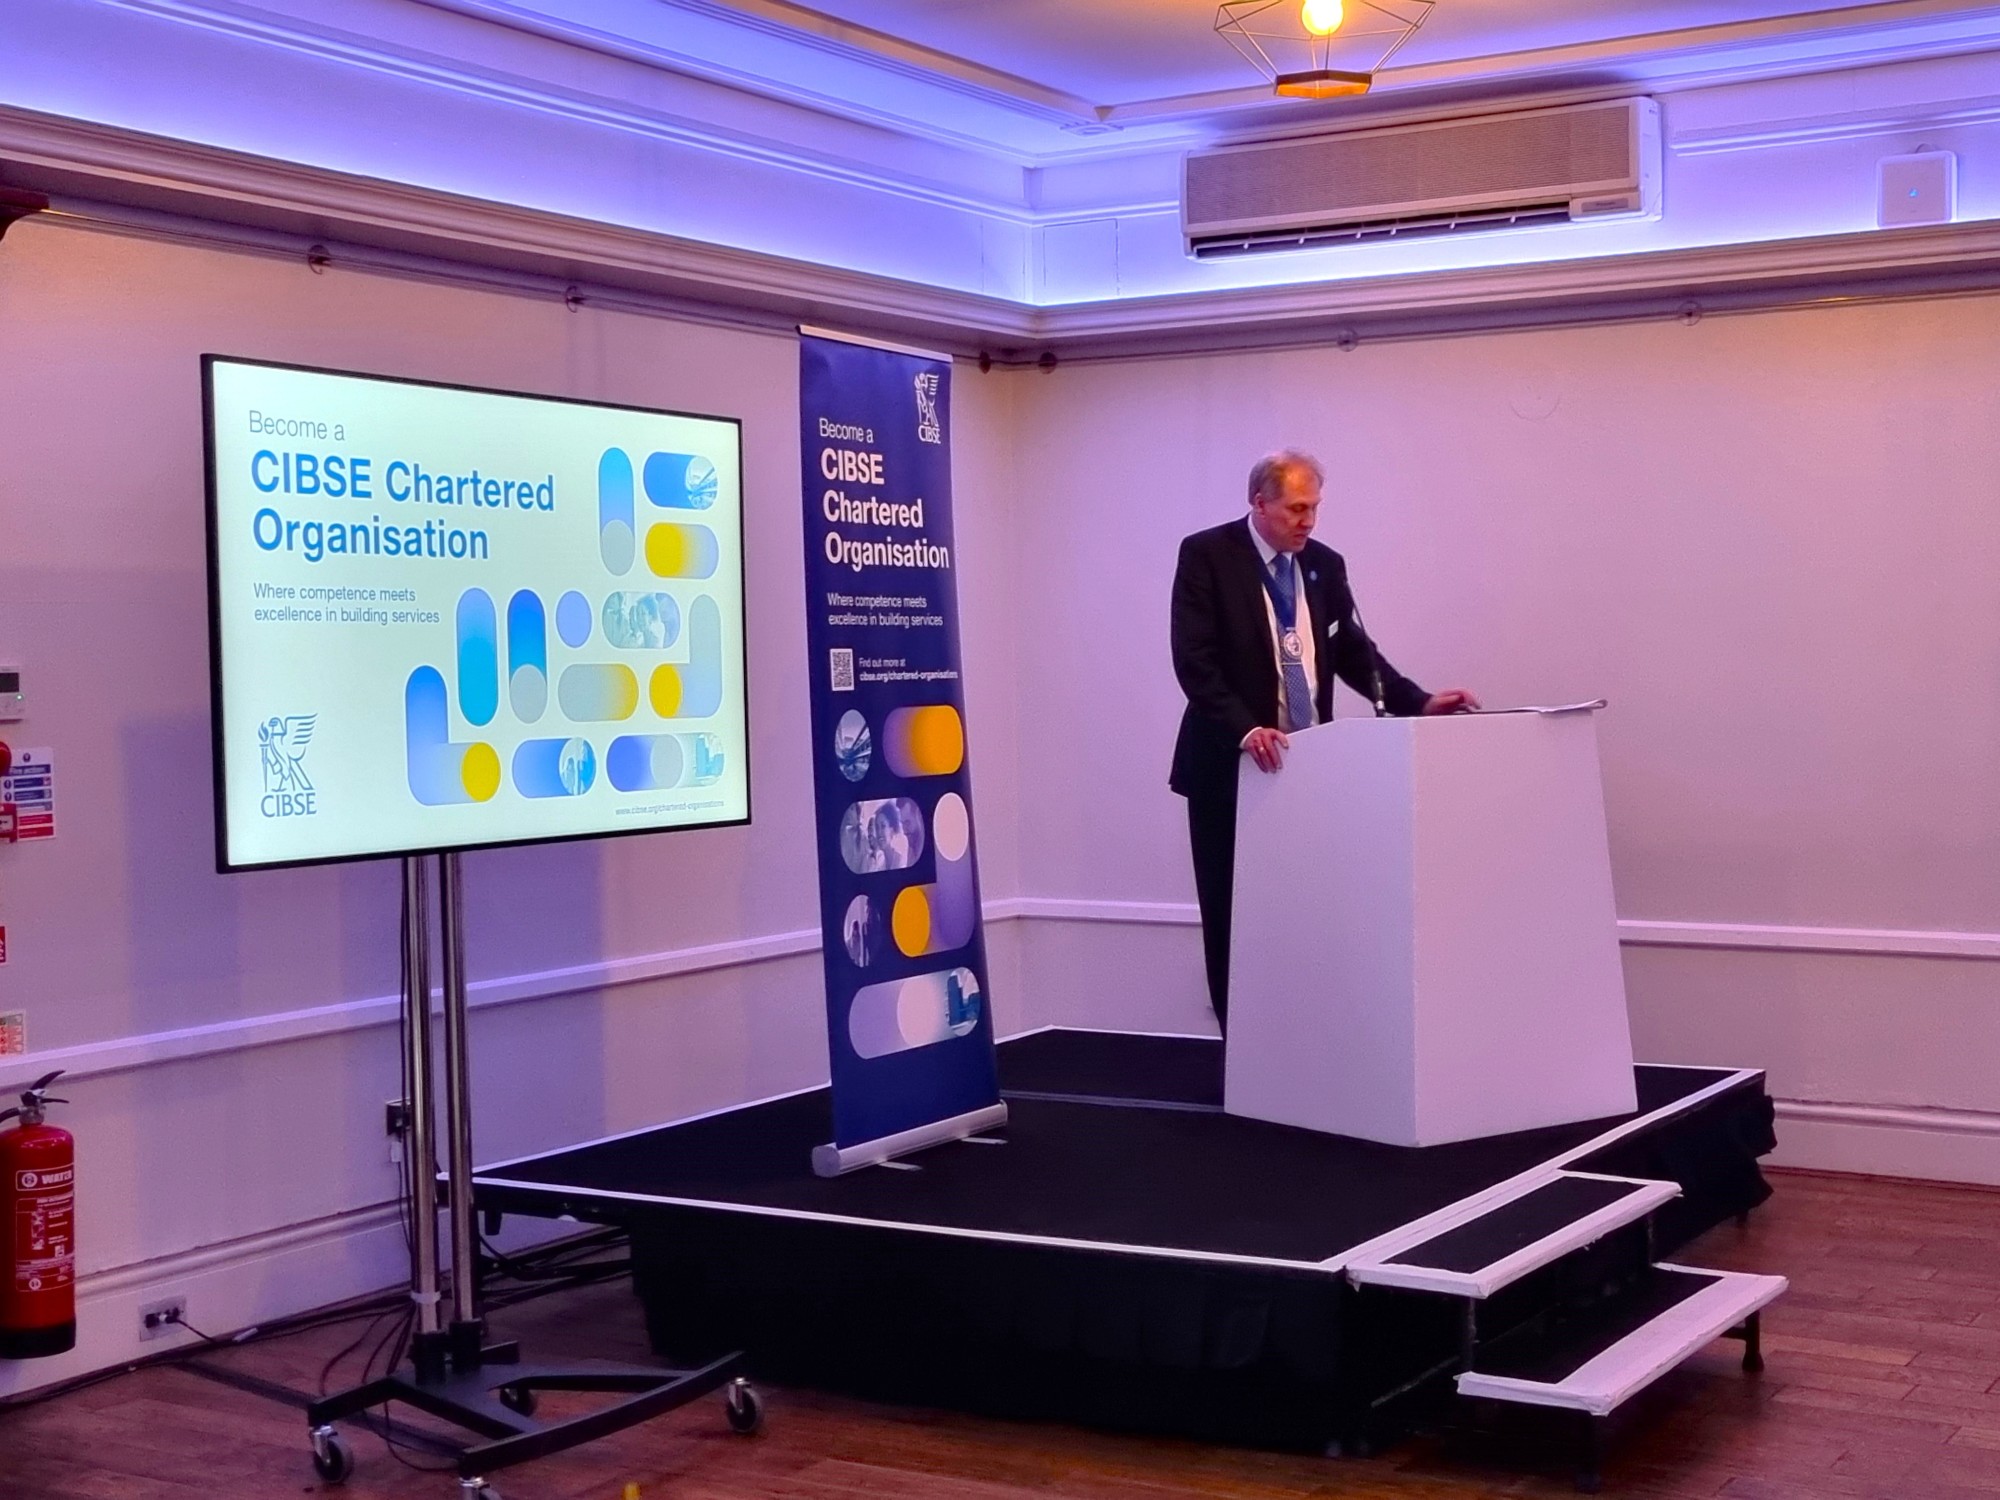 CIBSE Introduces New Chartered Organisation Programme